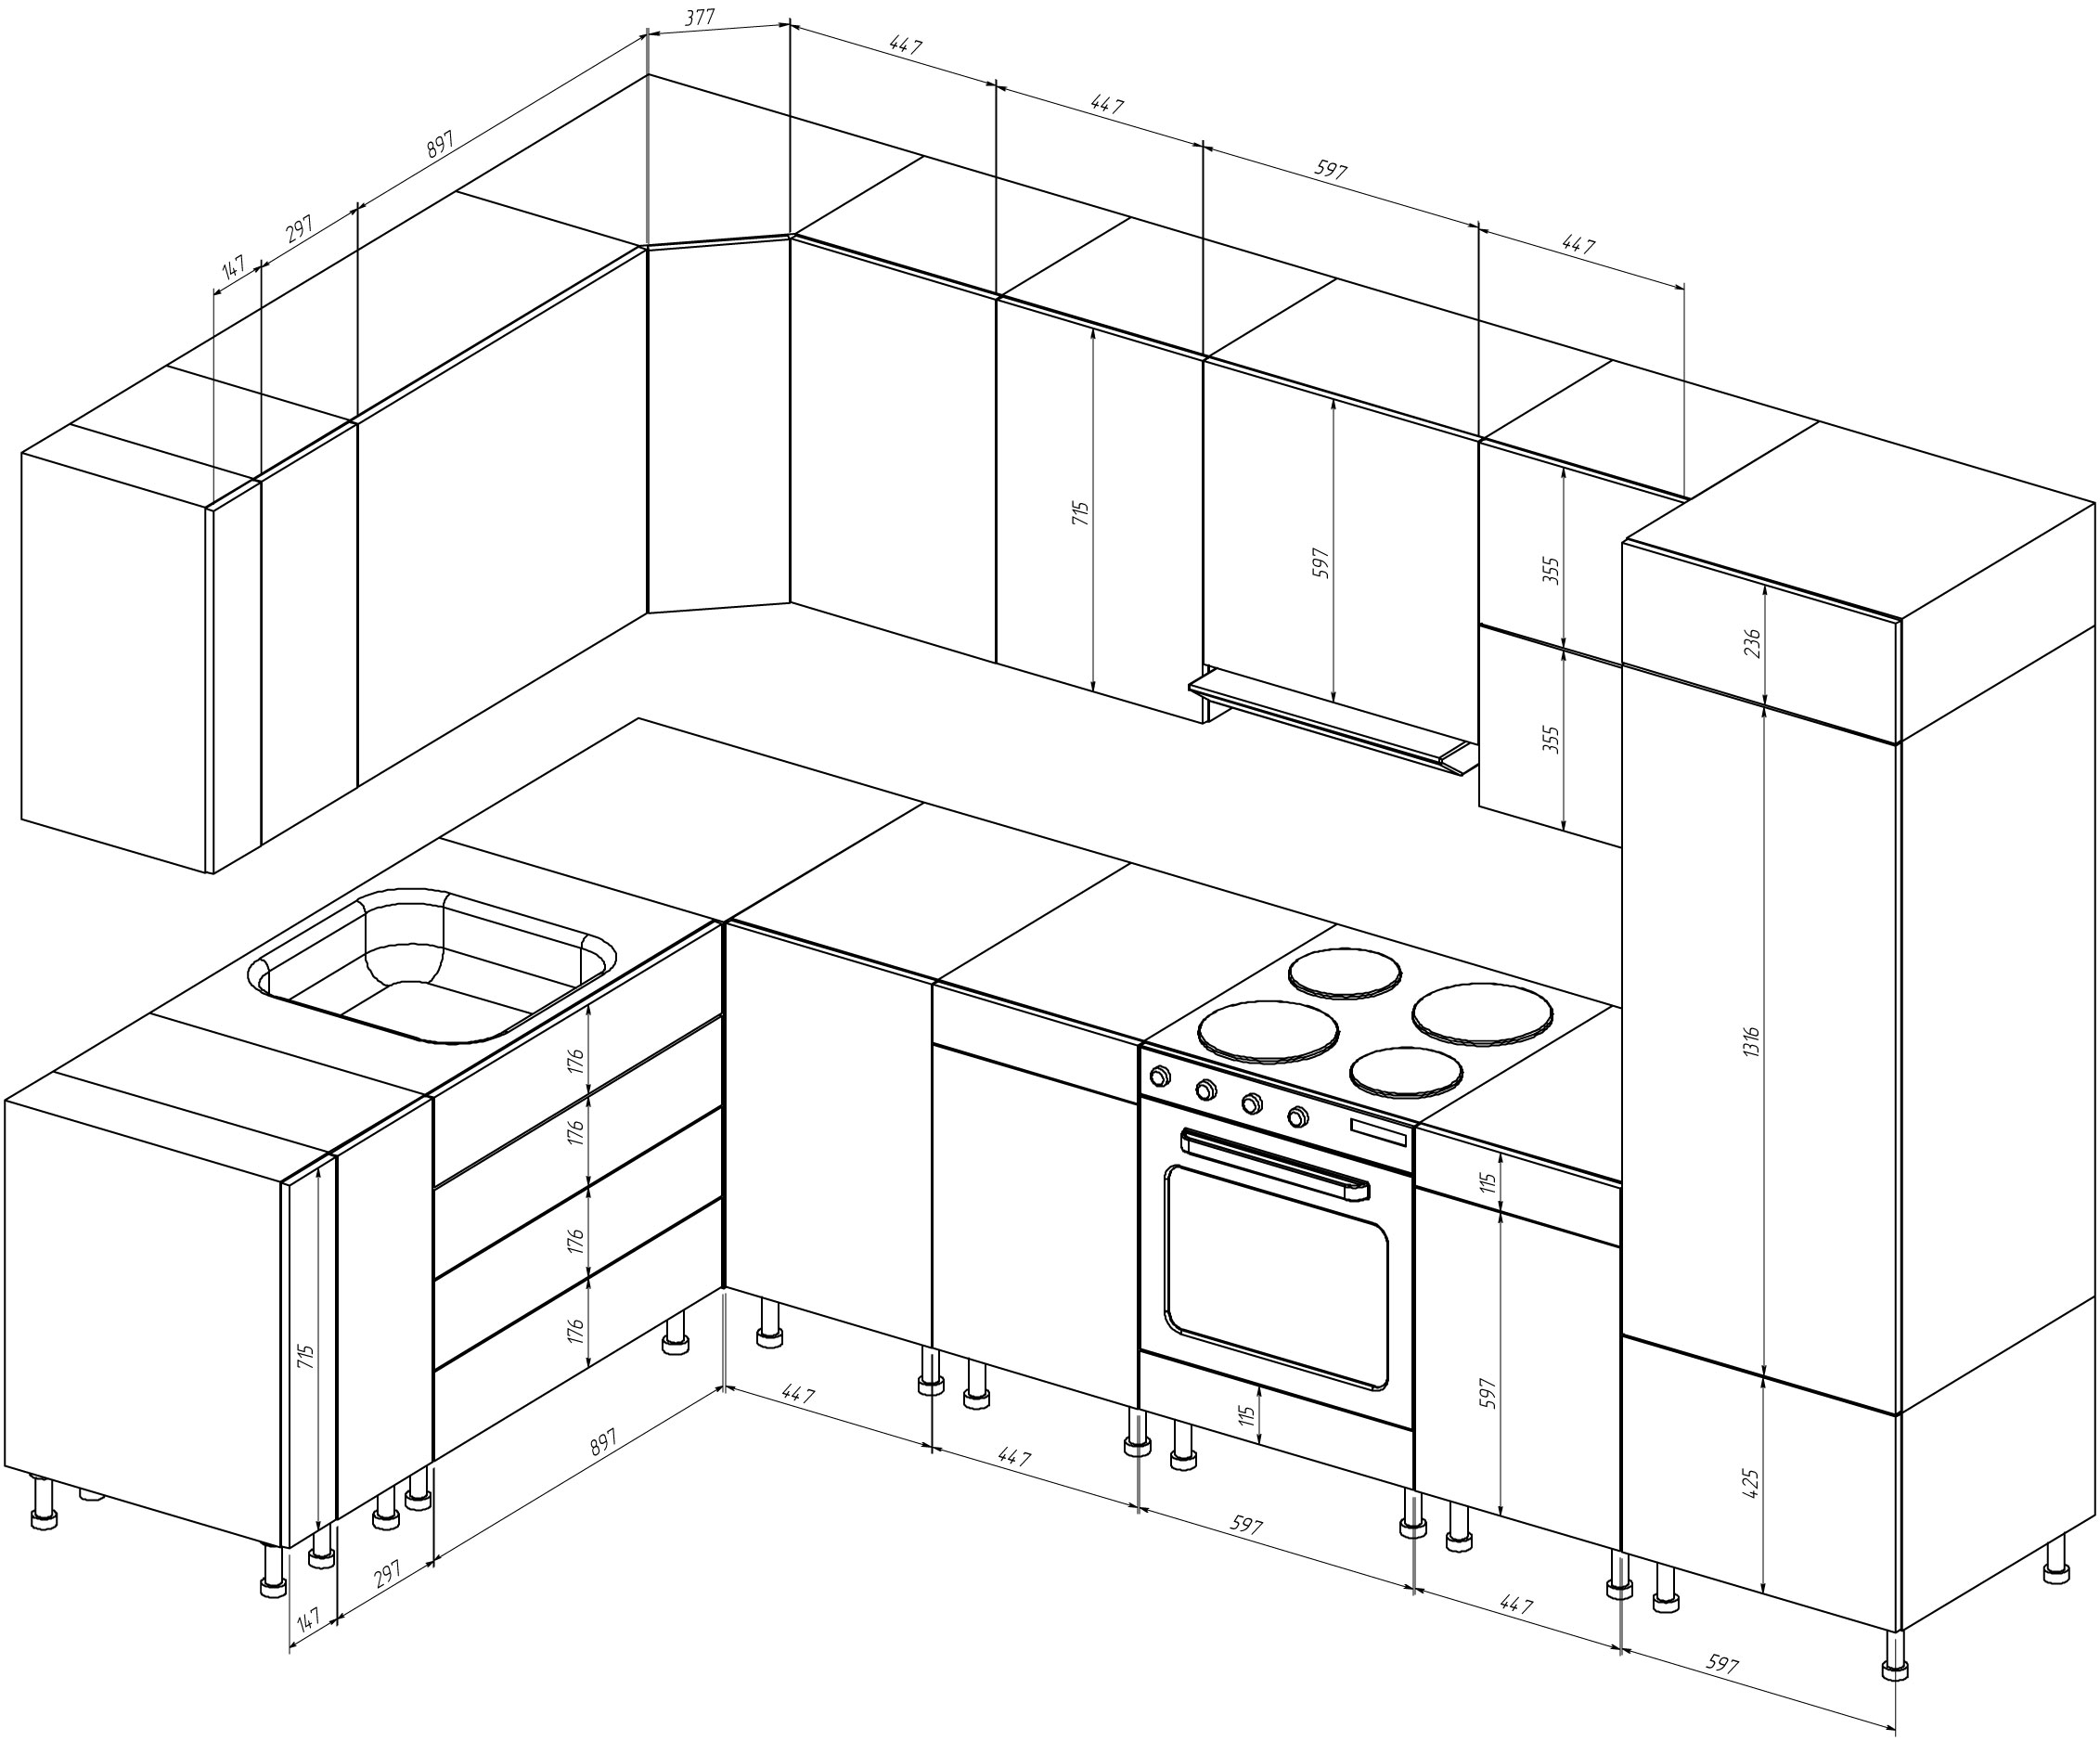 Drawing of a kitchen set